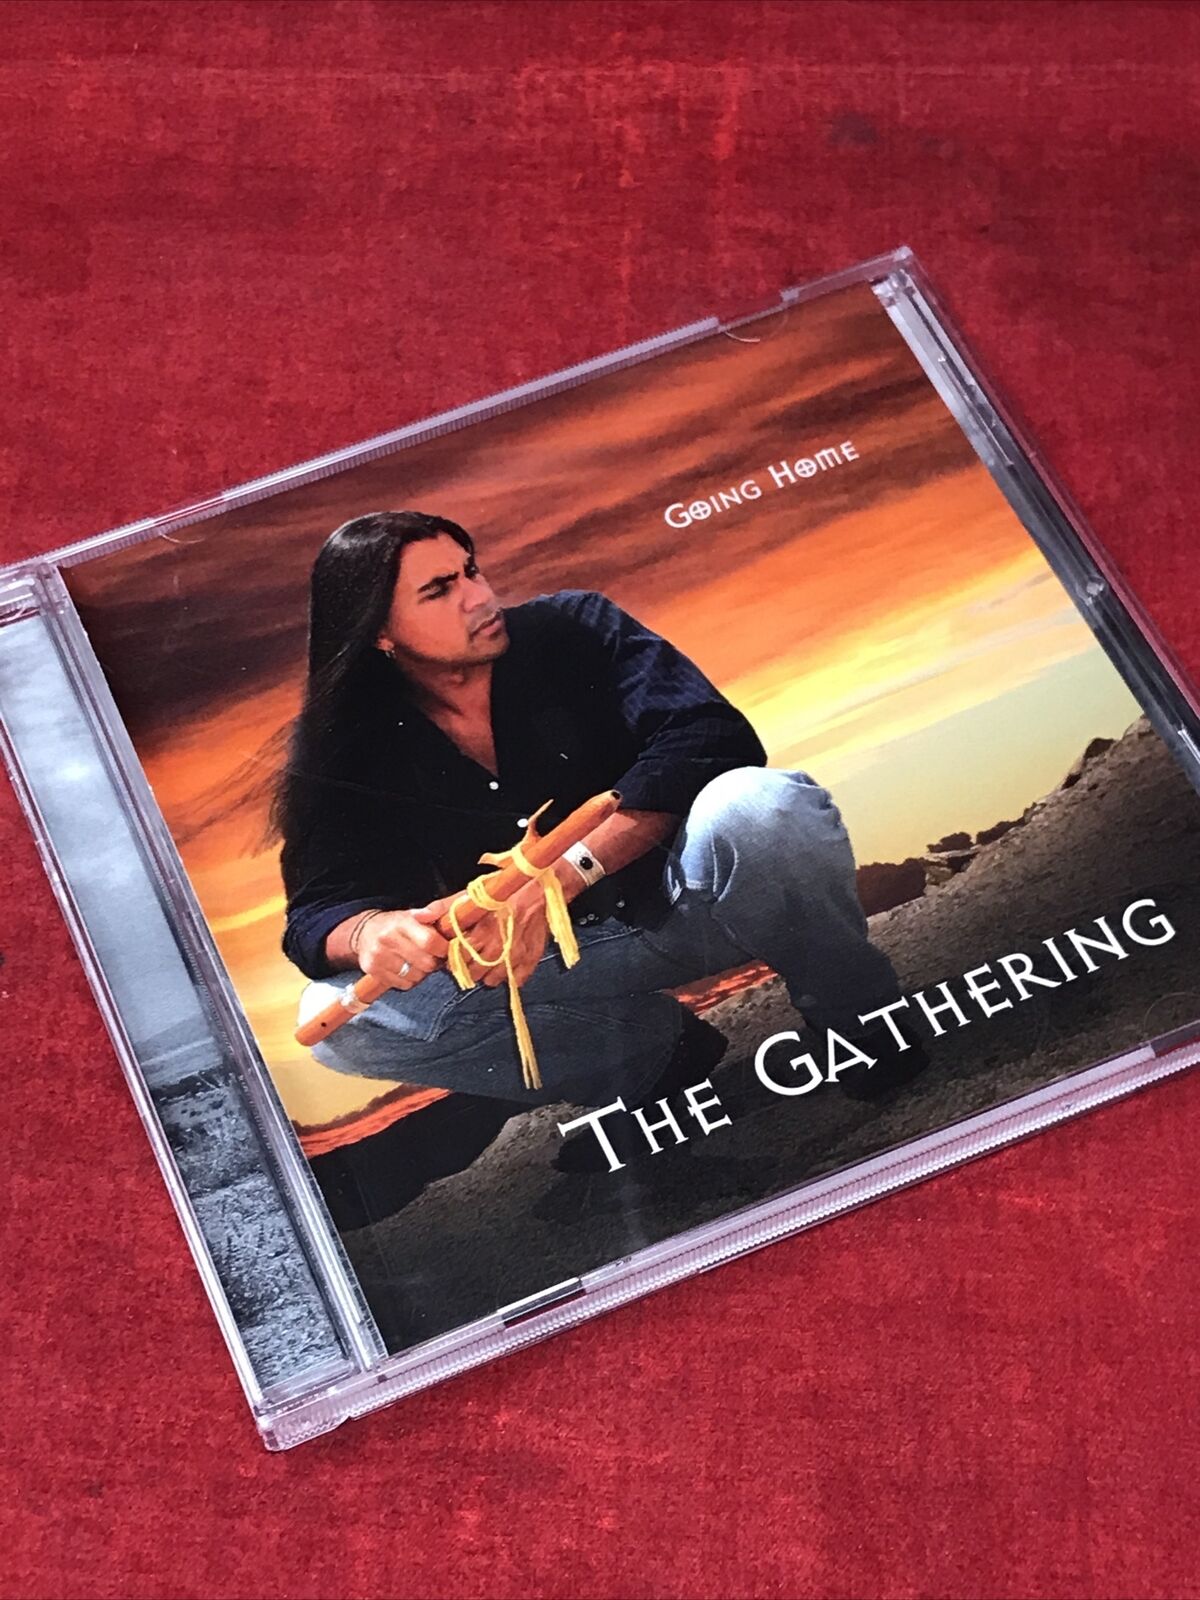 The Gathering - Going Home CD Sean Vasquez Native American